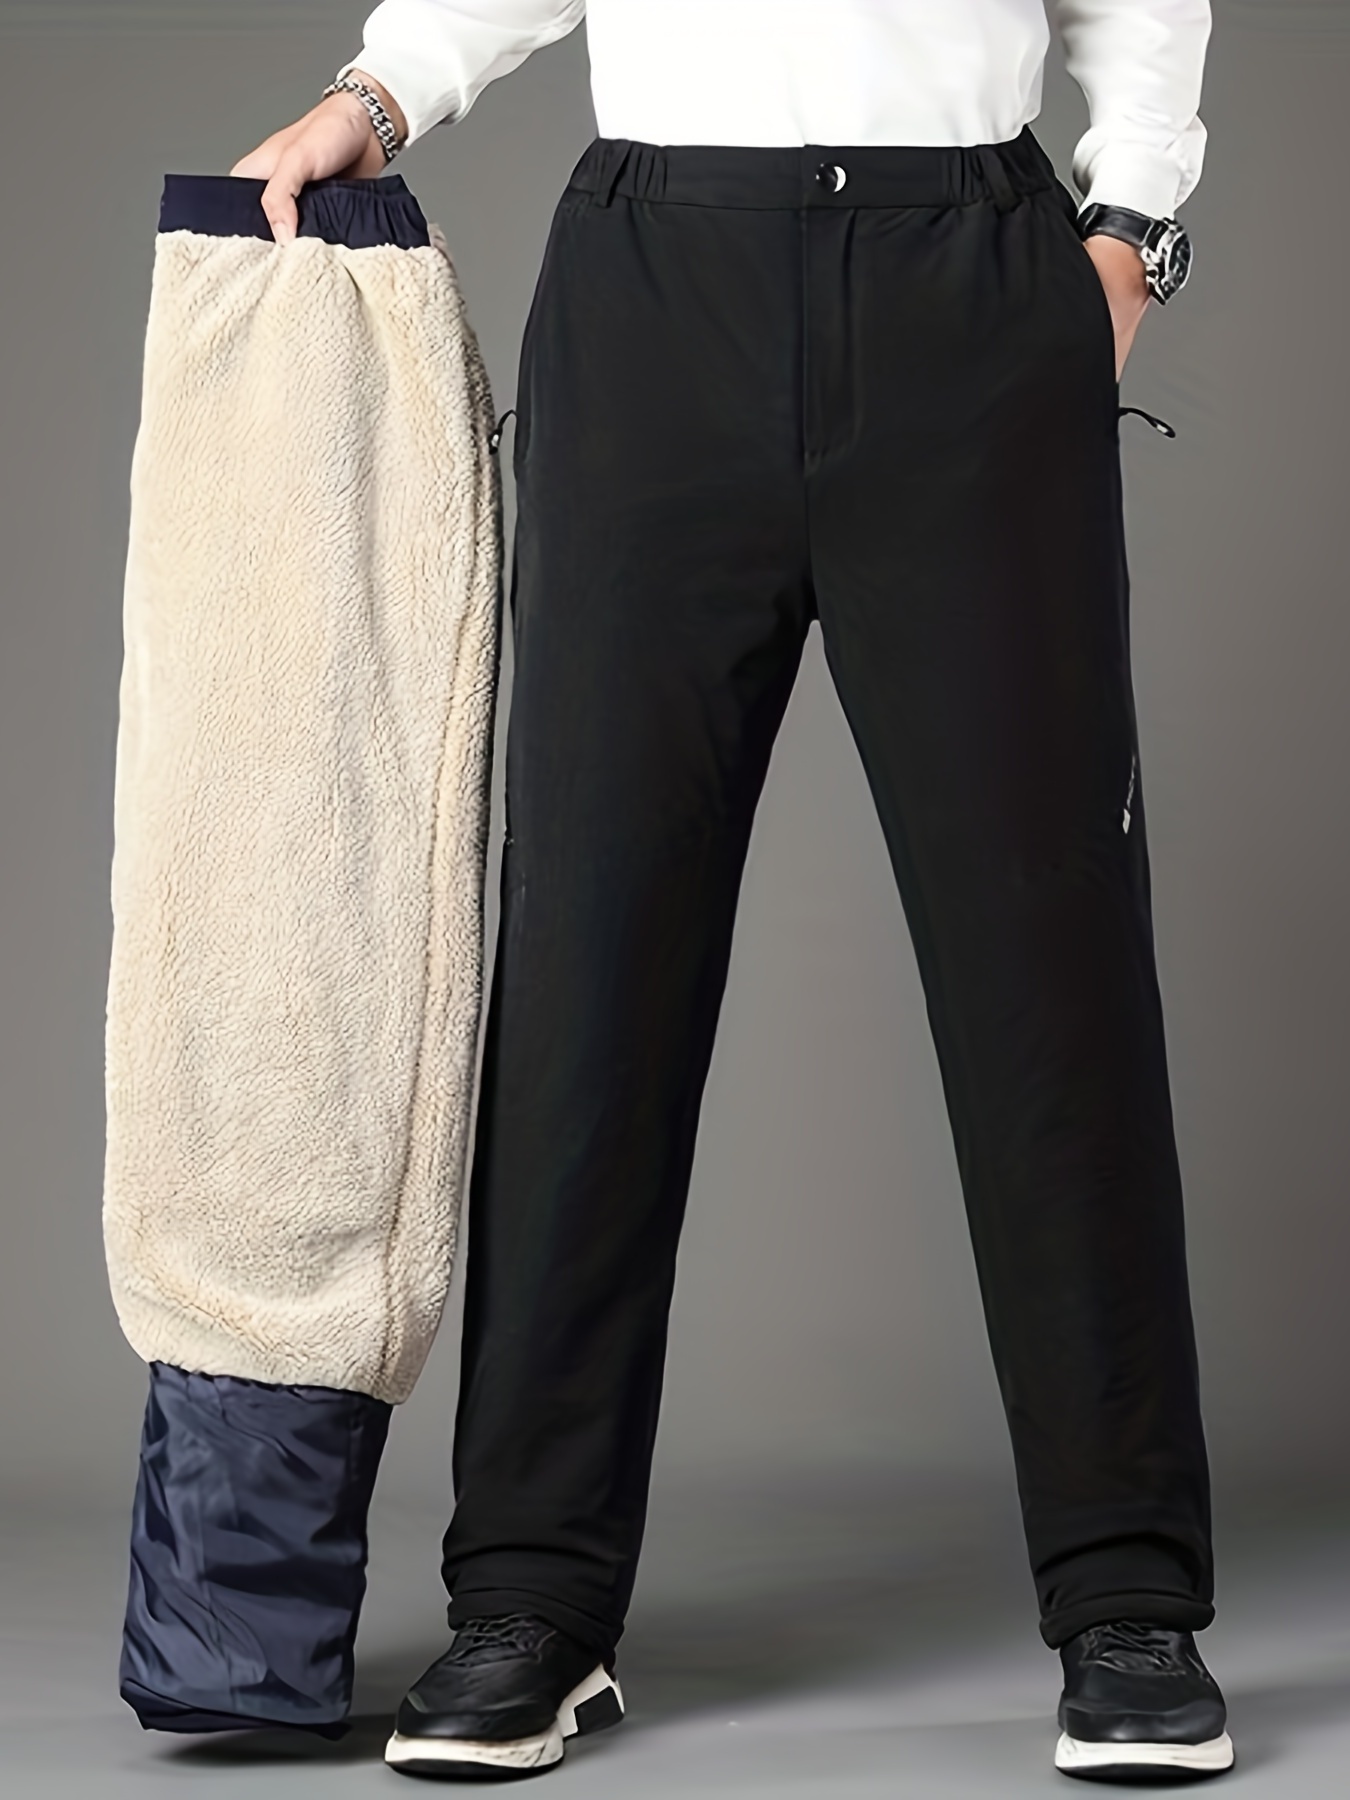 Women Padded Quilted Pants Winter Warm Thermal Wide Leg Trousers Outdoor  Work